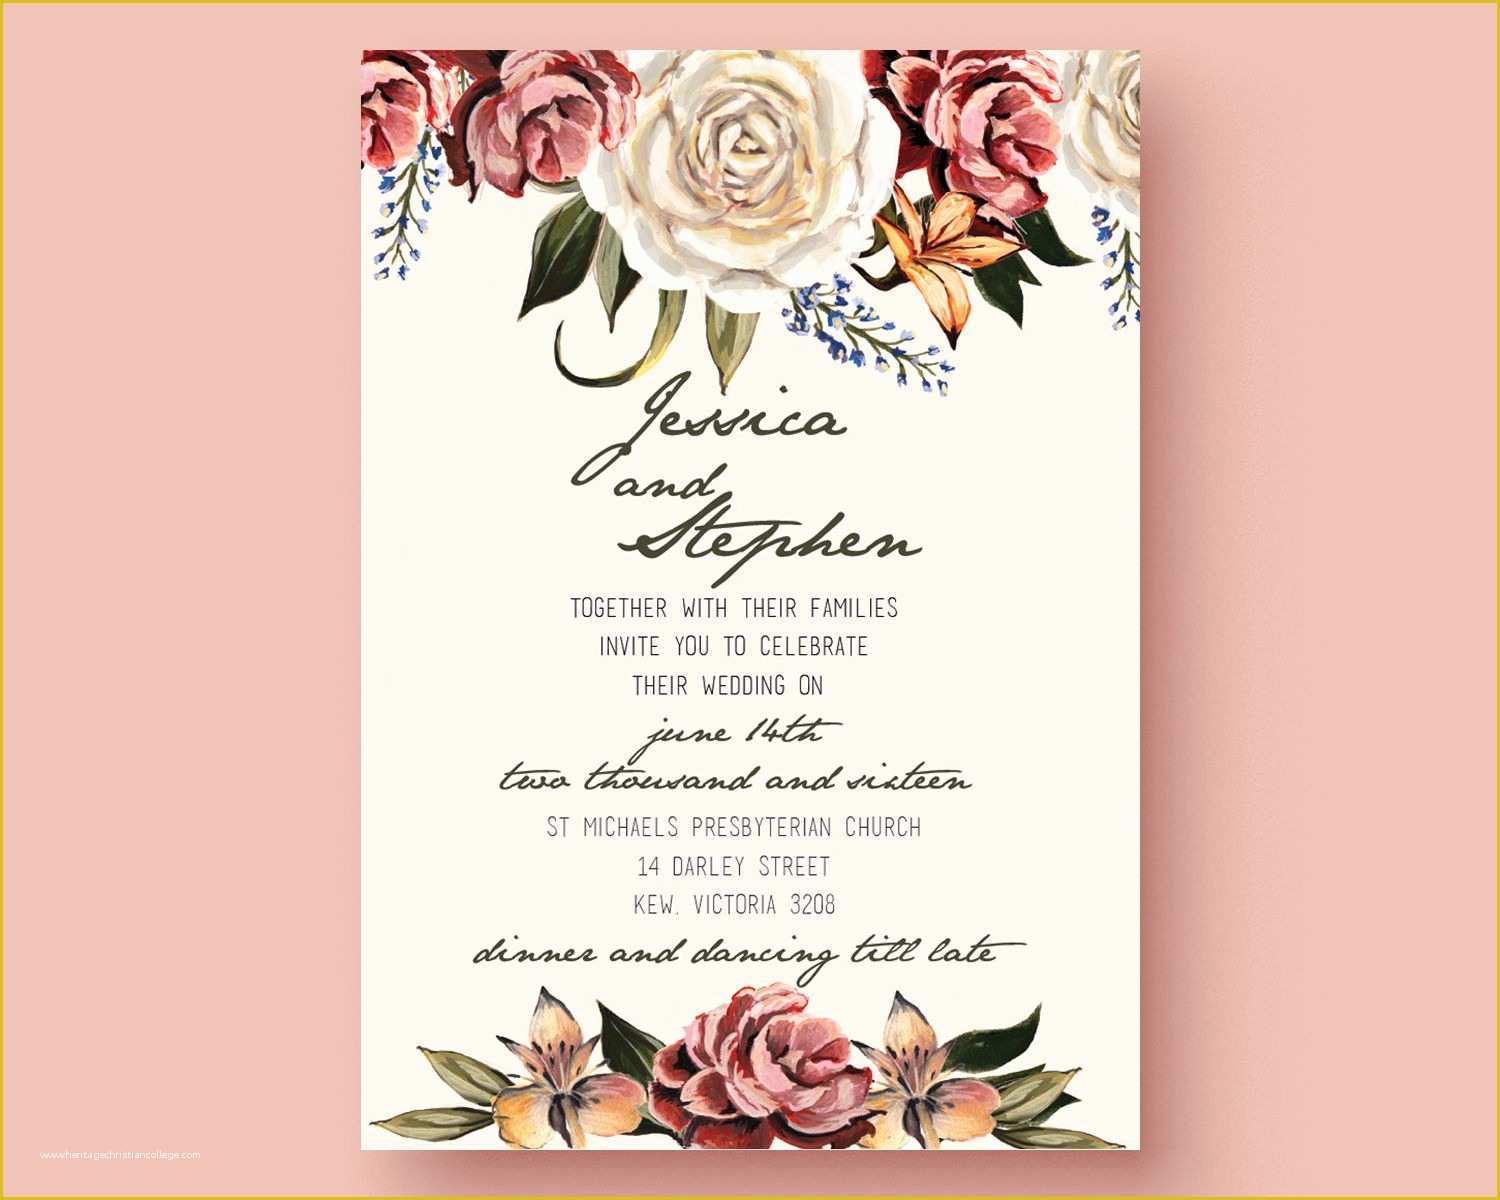 Wedding Invitation Design Templates Free Download Of Get the Template Free This is An Adobe